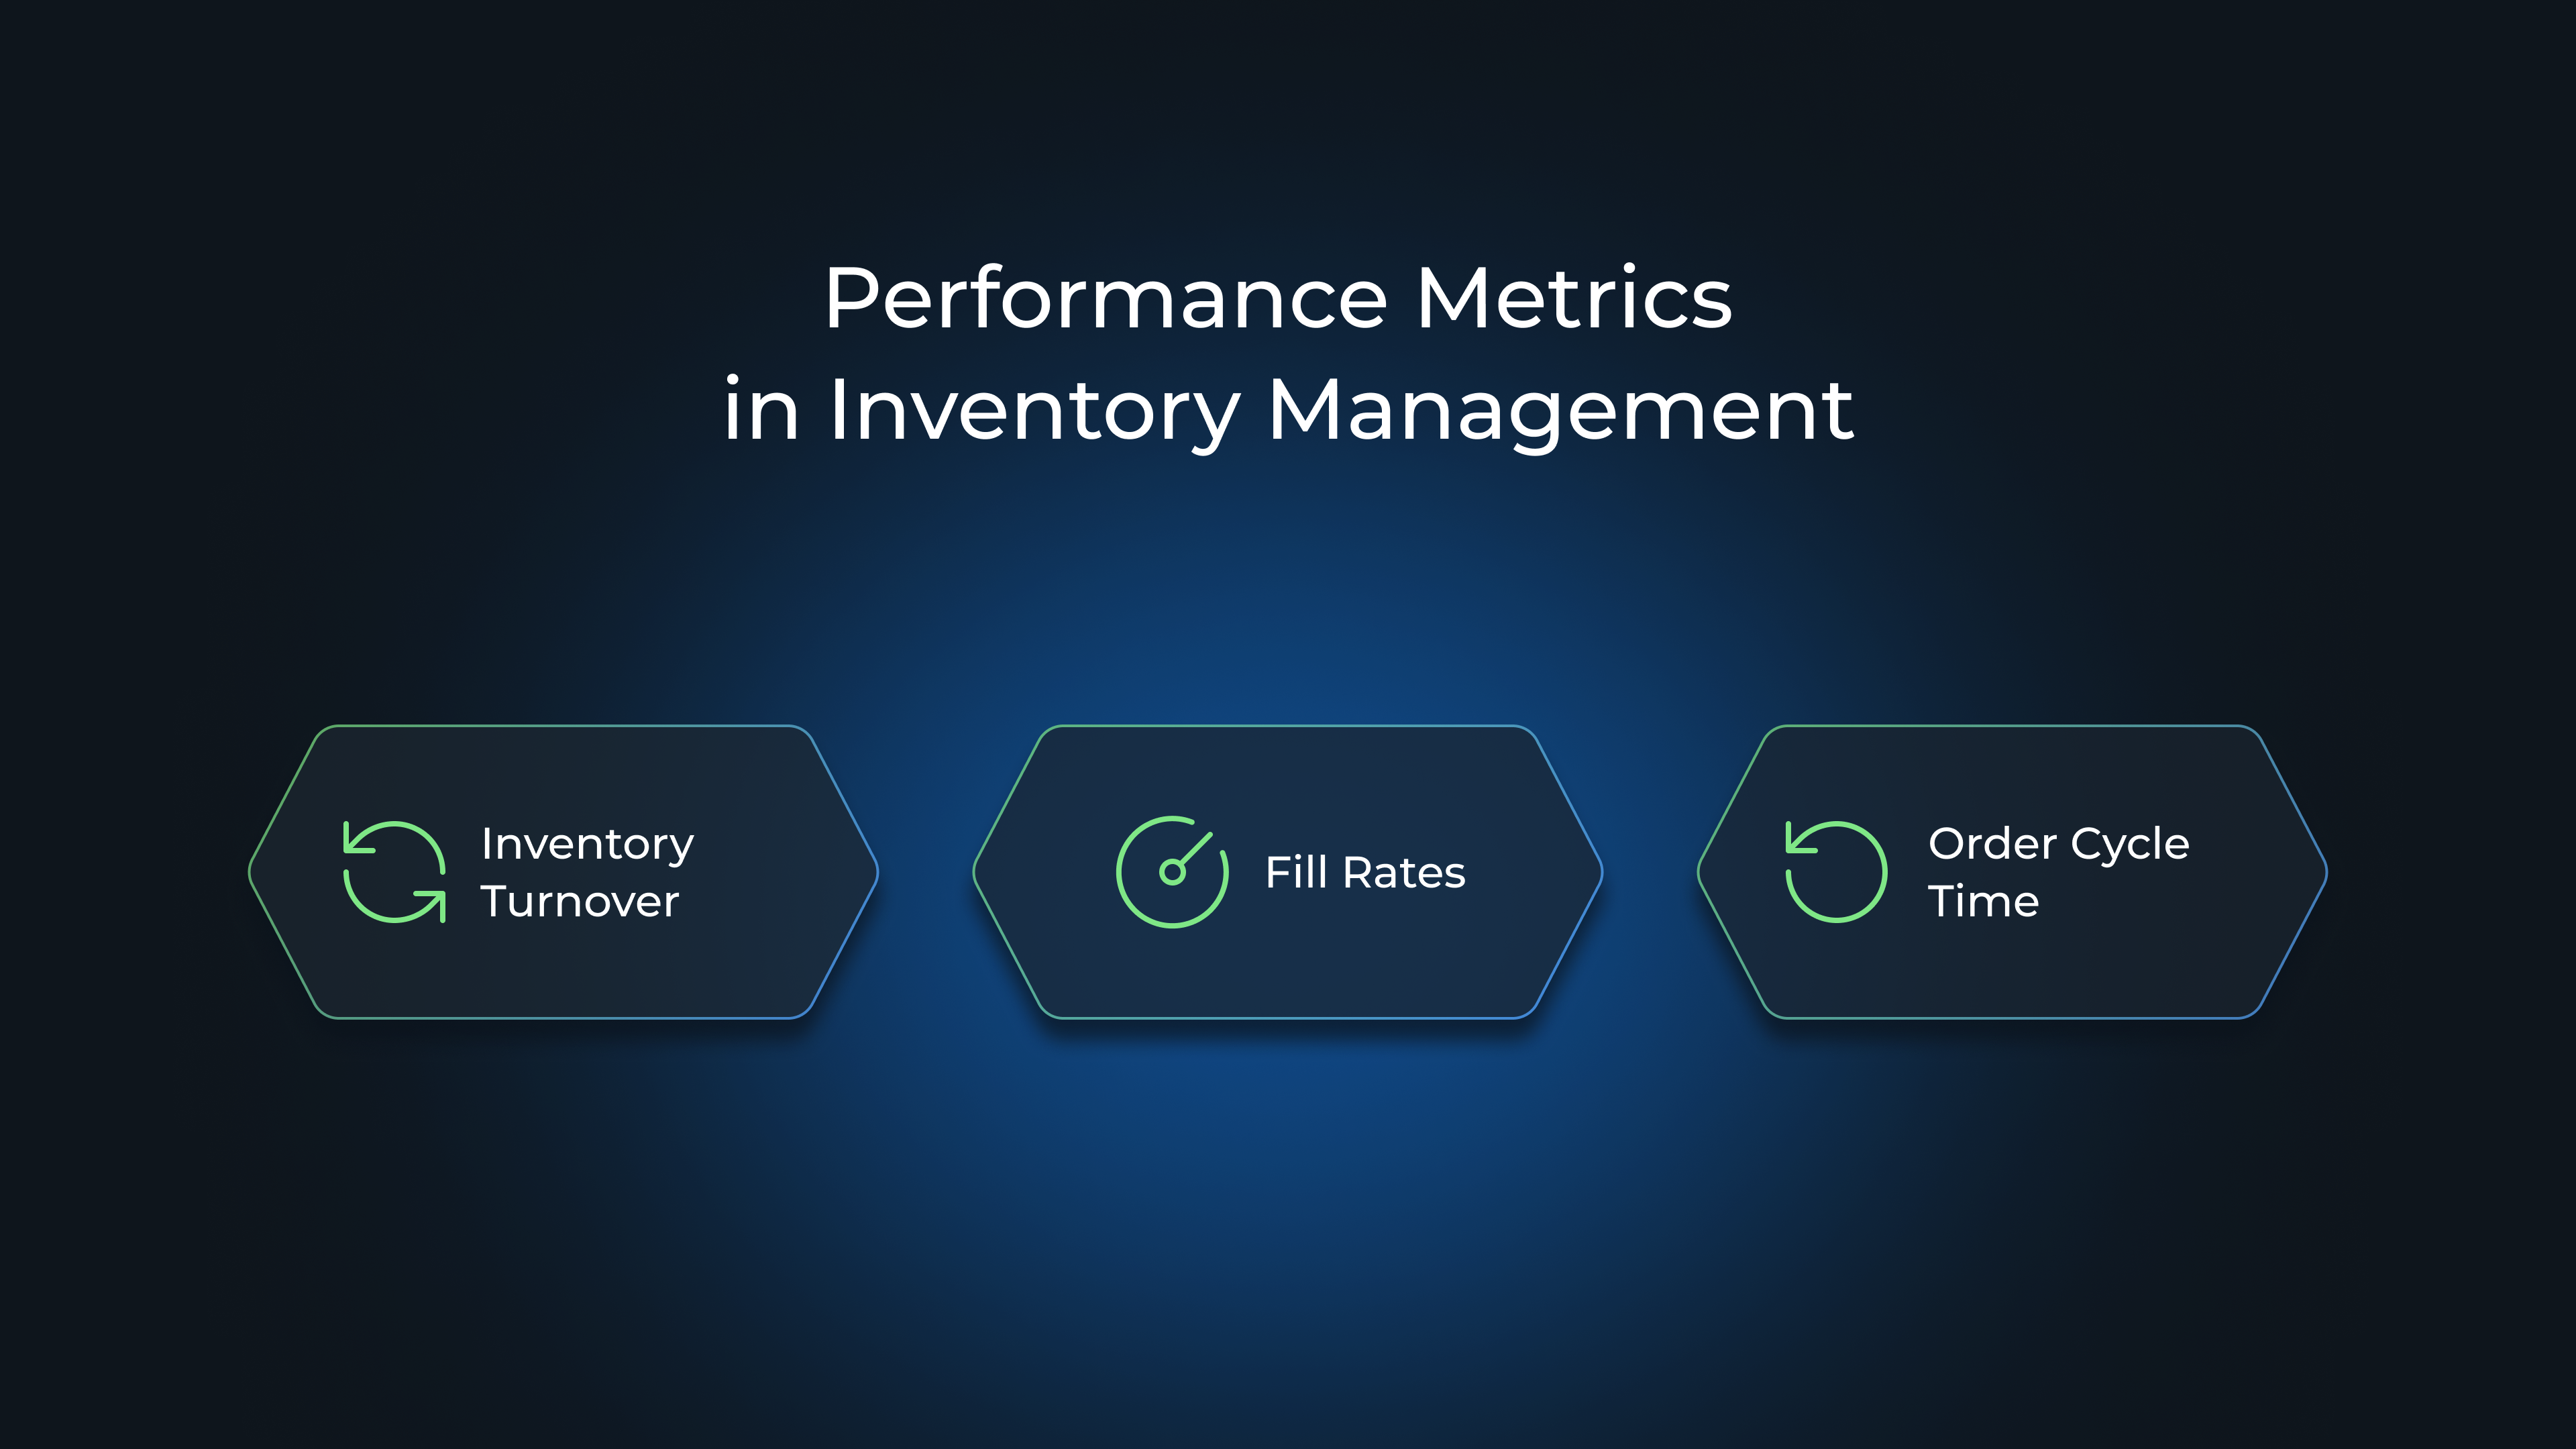 Performance Metrics in Inventory Management: Inventory Turnover, Fill Rates, Order Cycle Time
